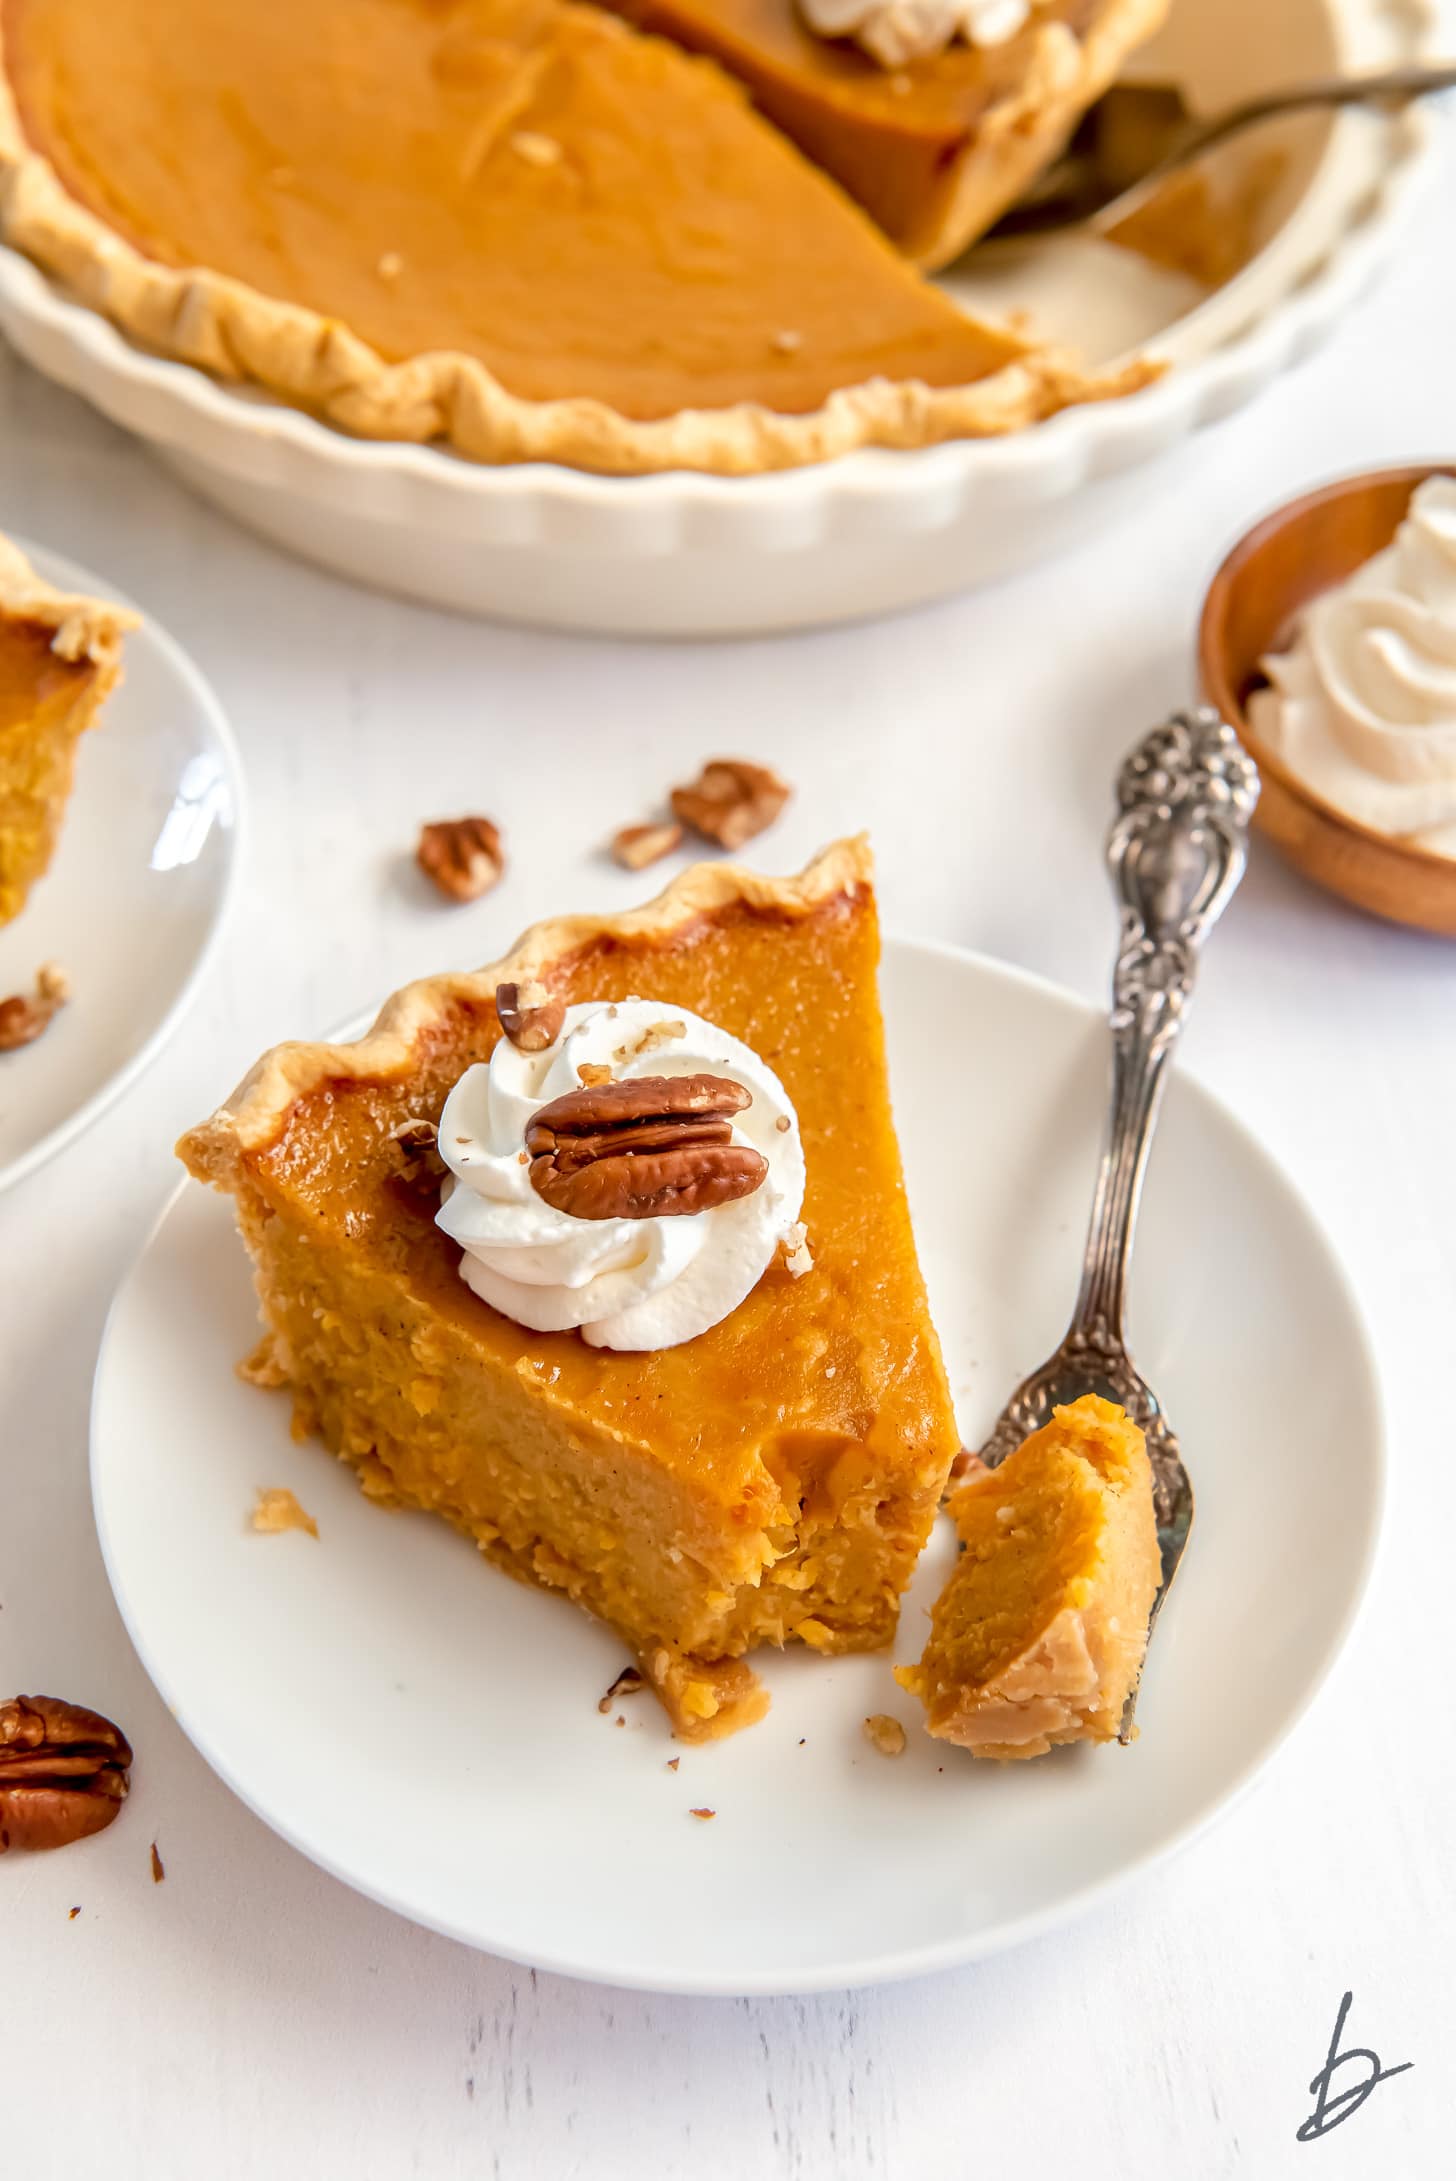 white round plate with slice of sweet potato pie garnished with whipped cream and pecan with fork taking bite